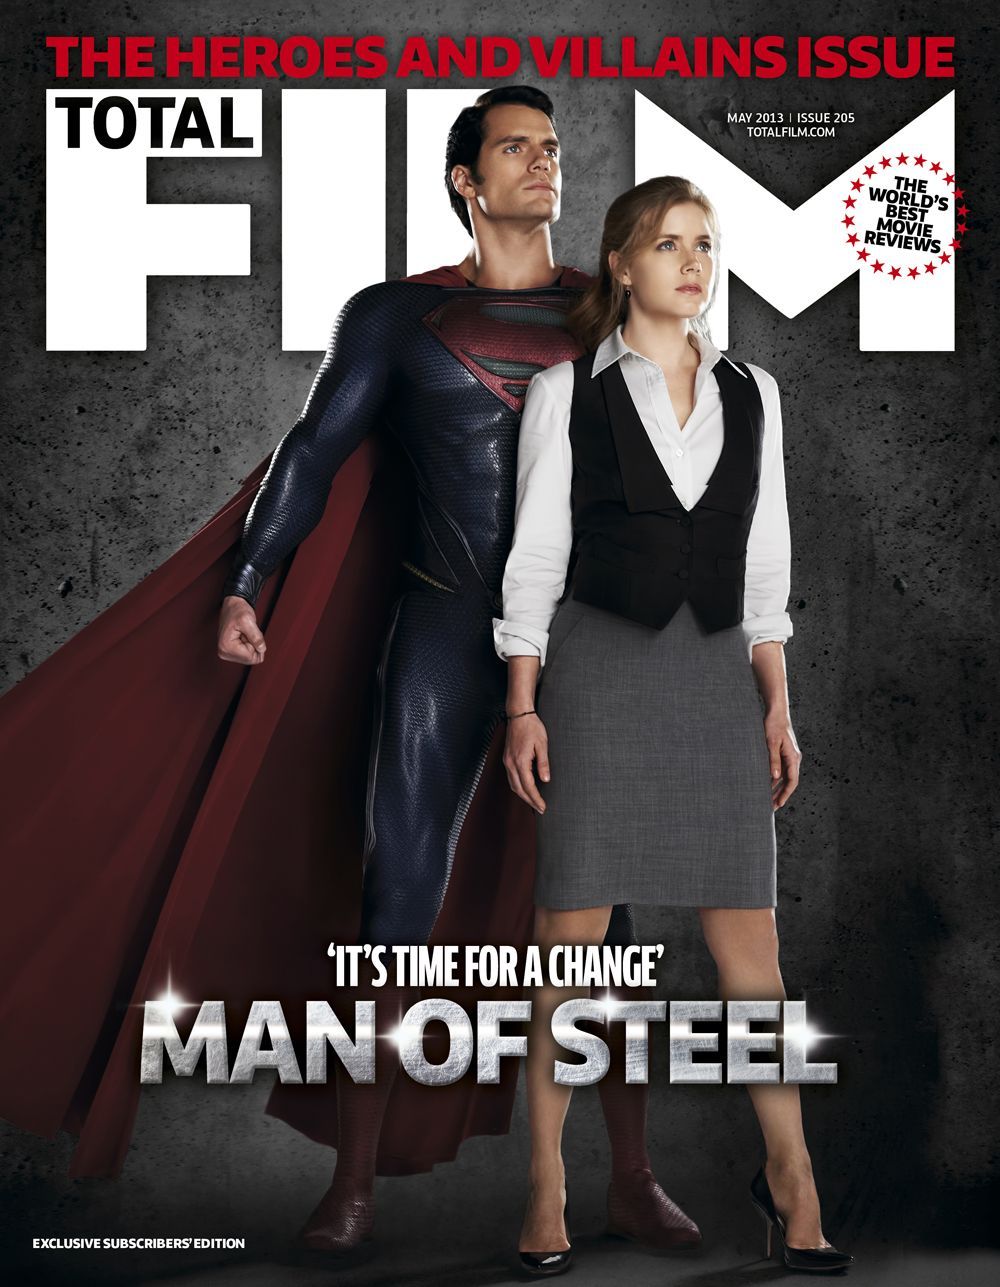 Man of Steel Total Film Magazine Cover 2